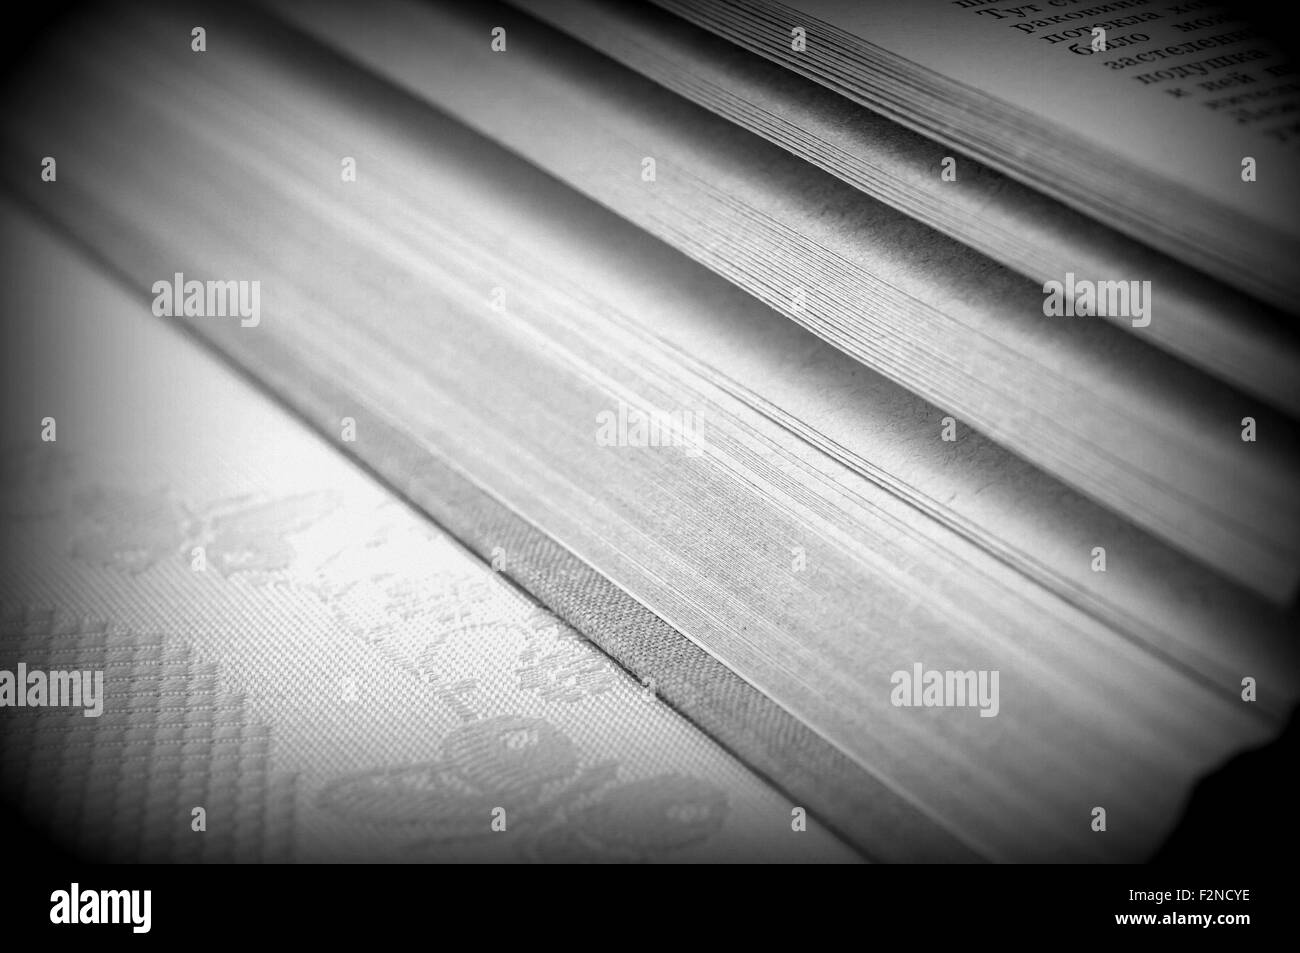 An old book lying on the table close up Stock Photo